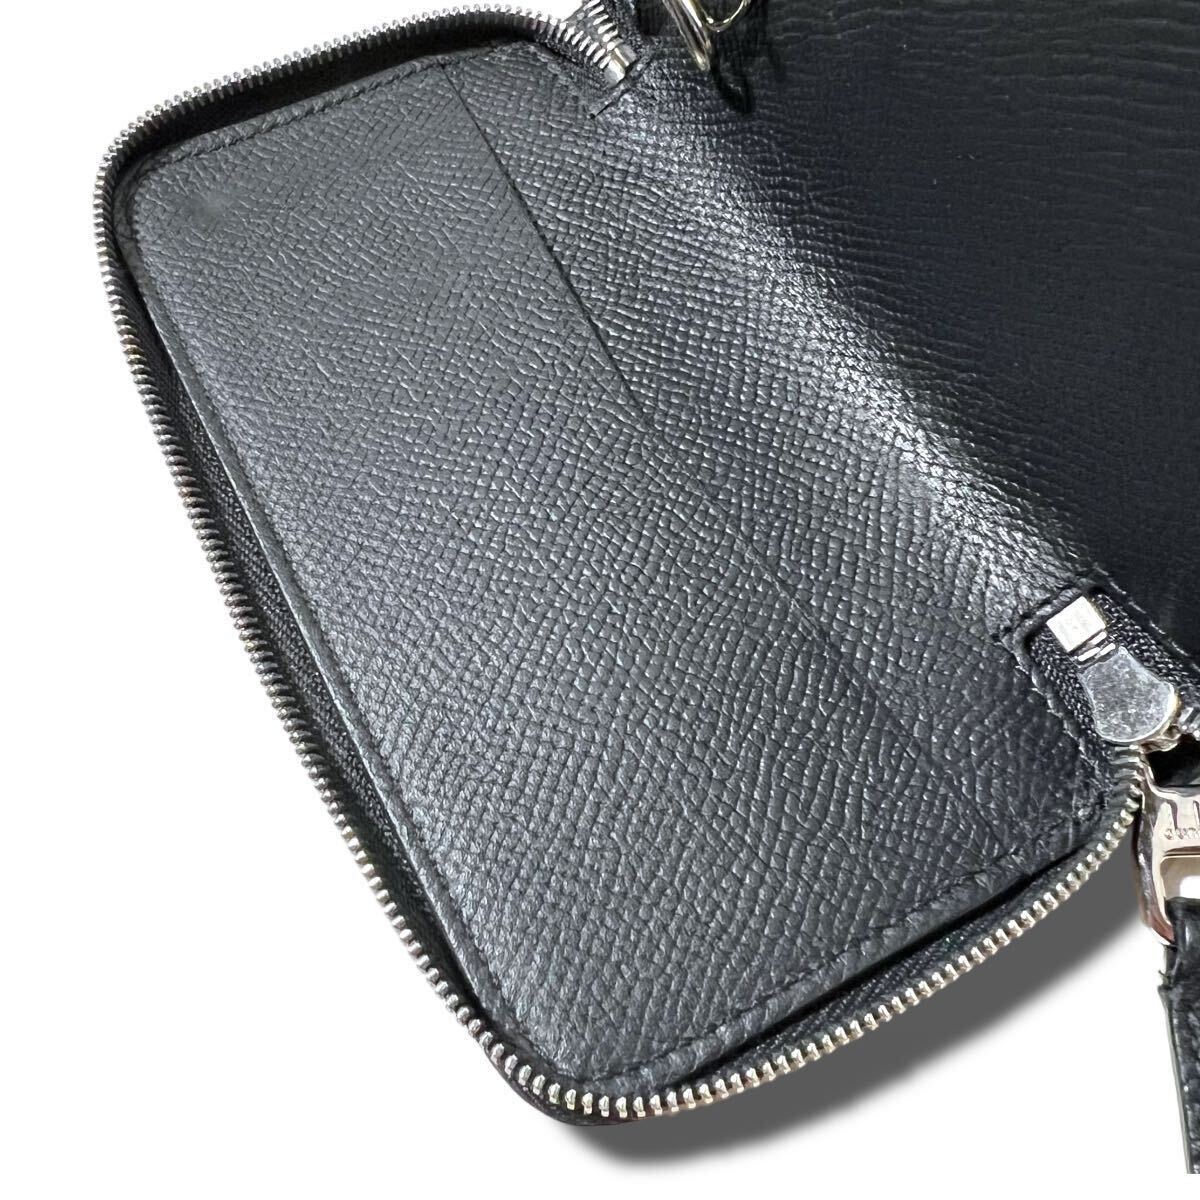  superior article dunhill AD Logo round Zip 6 ream key case leather black Dunhill 